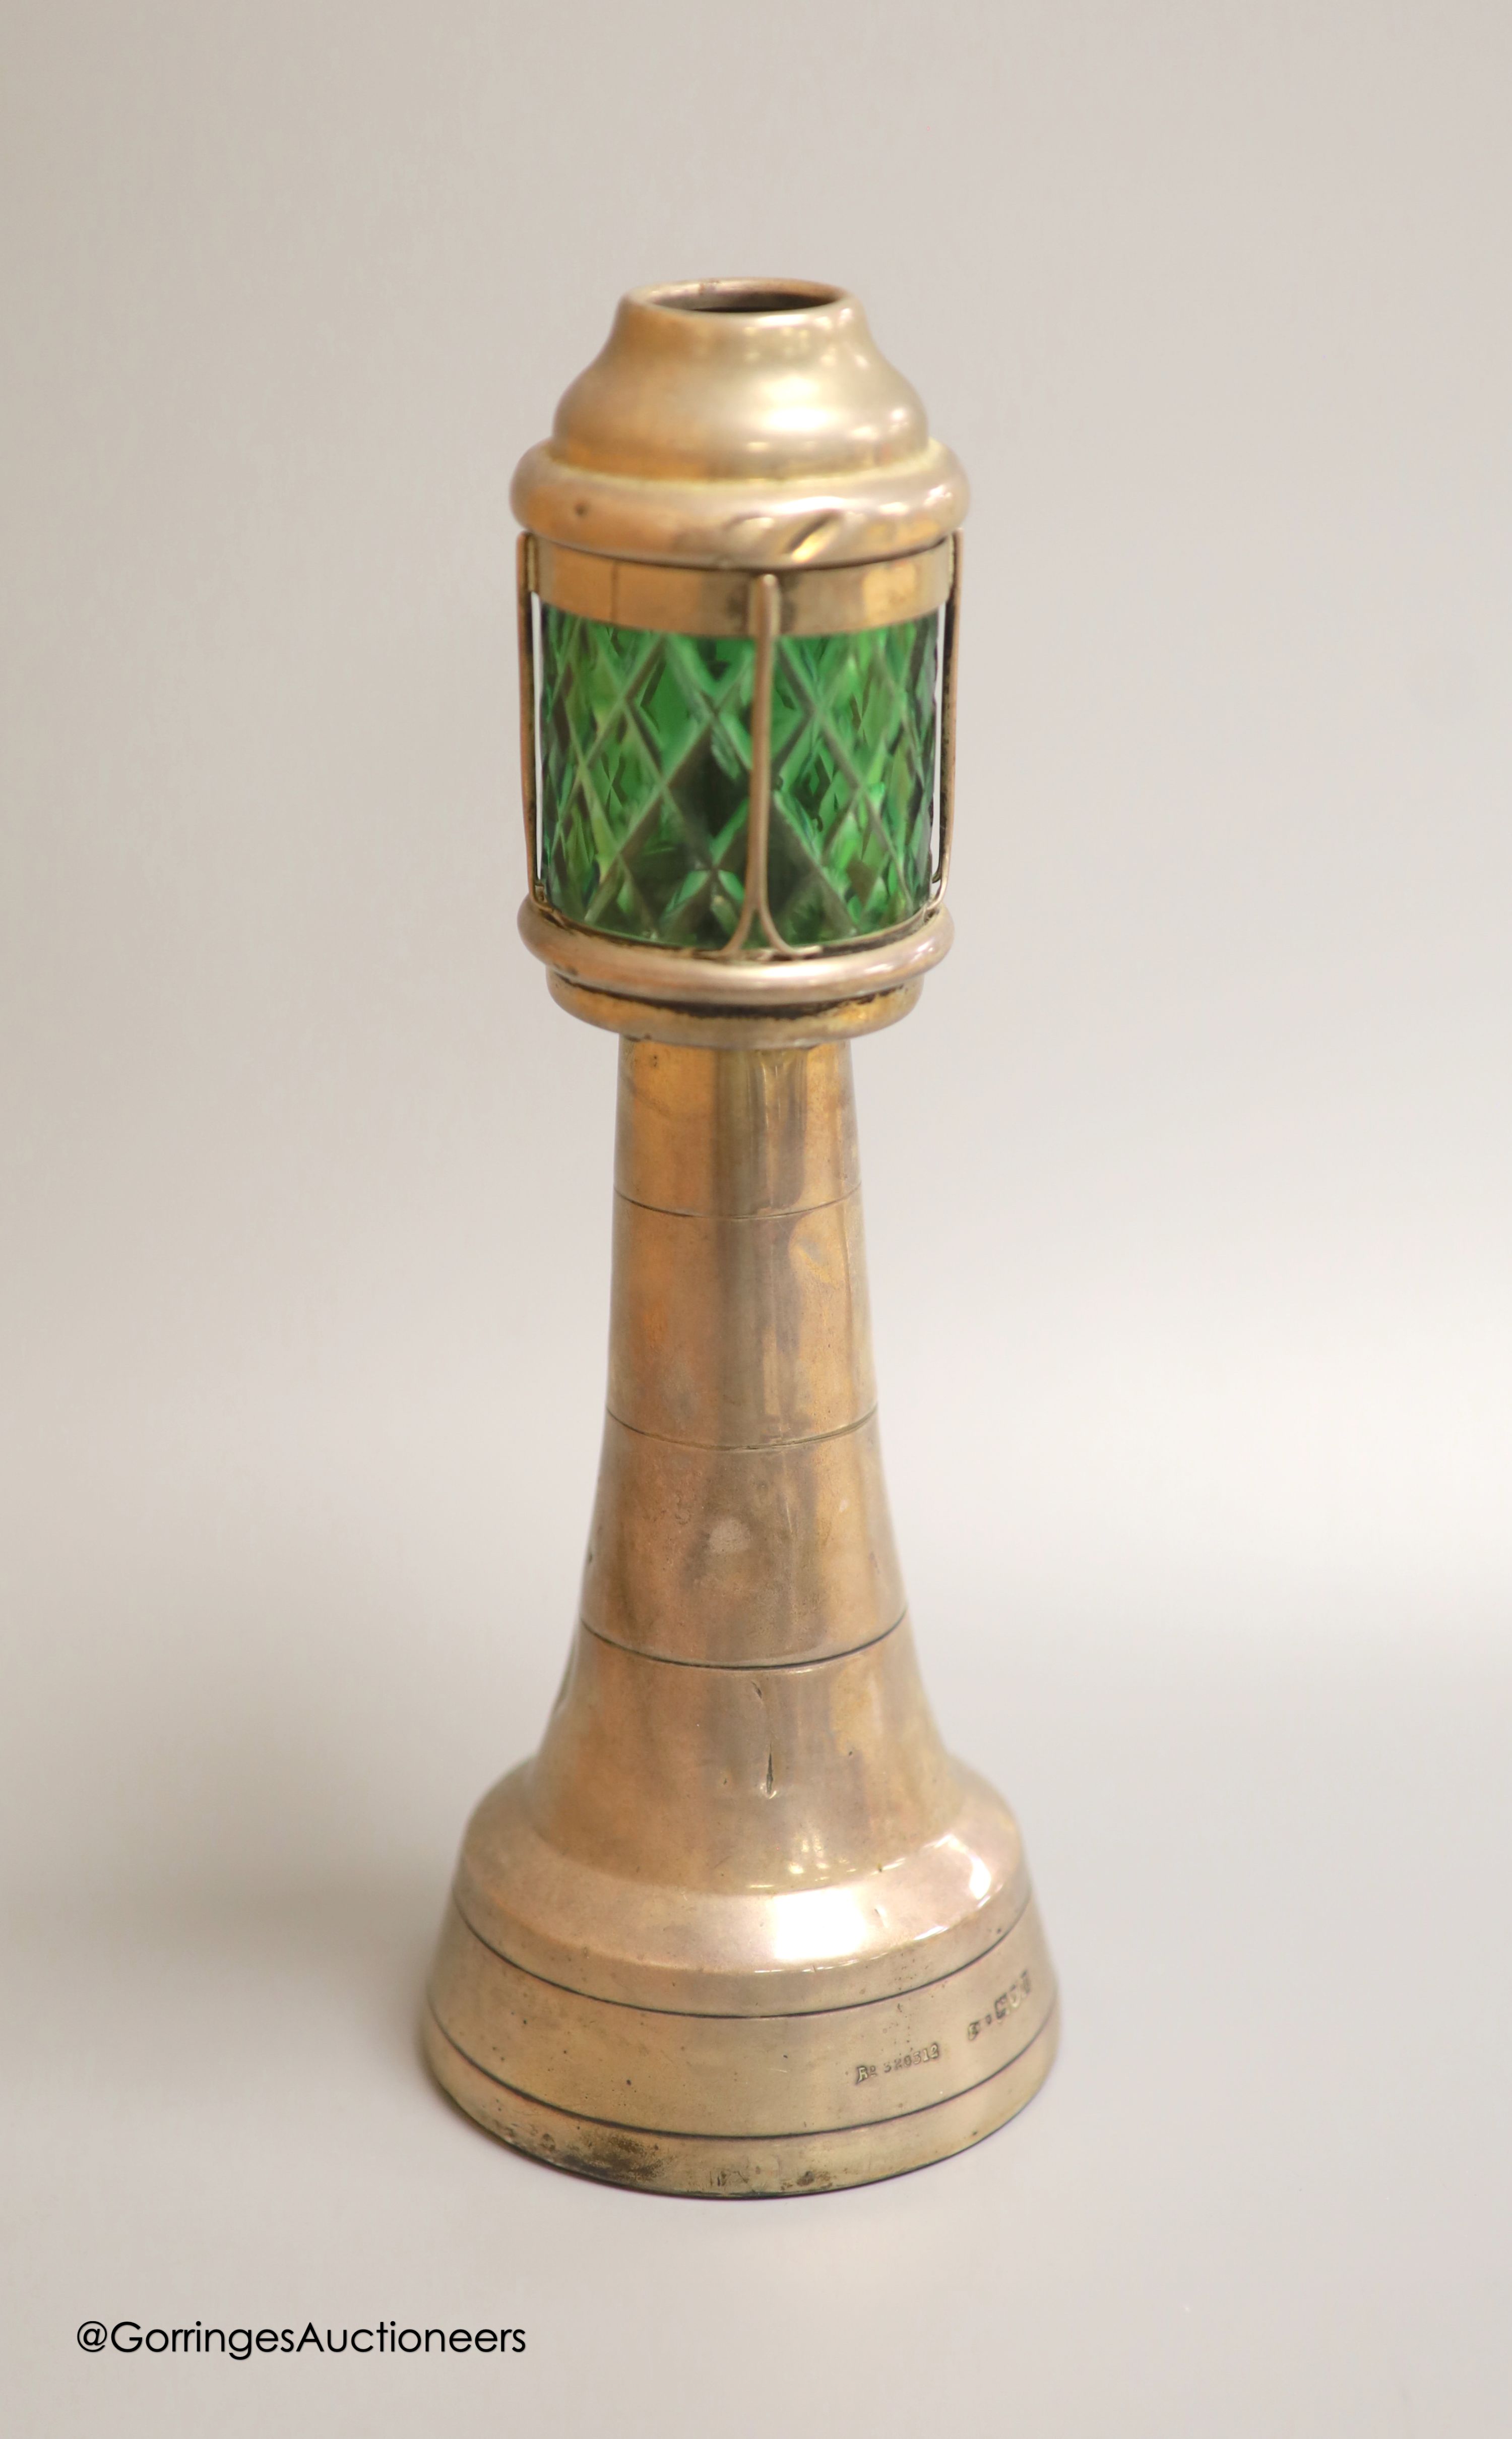 An Edwardian silver and green glass mounted novelty table lighter, modelled as a lighthouse, by Grey &Co, London, 1907/8, 25.4cm, (a.f.)